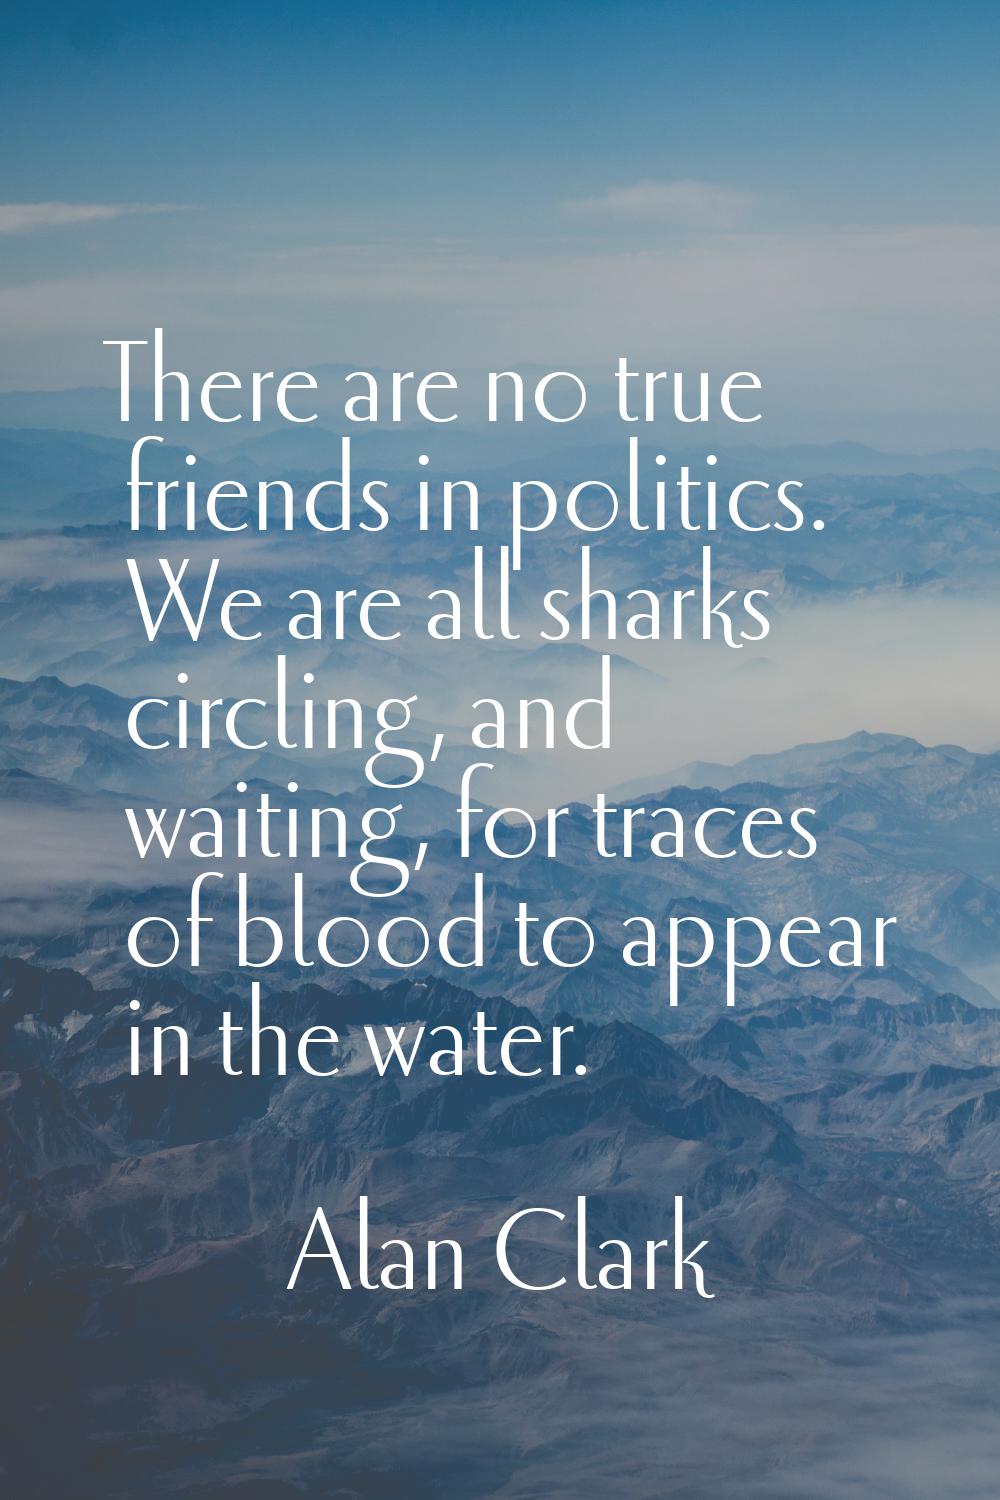 There are no true friends in politics. We are all sharks circling, and waiting, for traces of blood